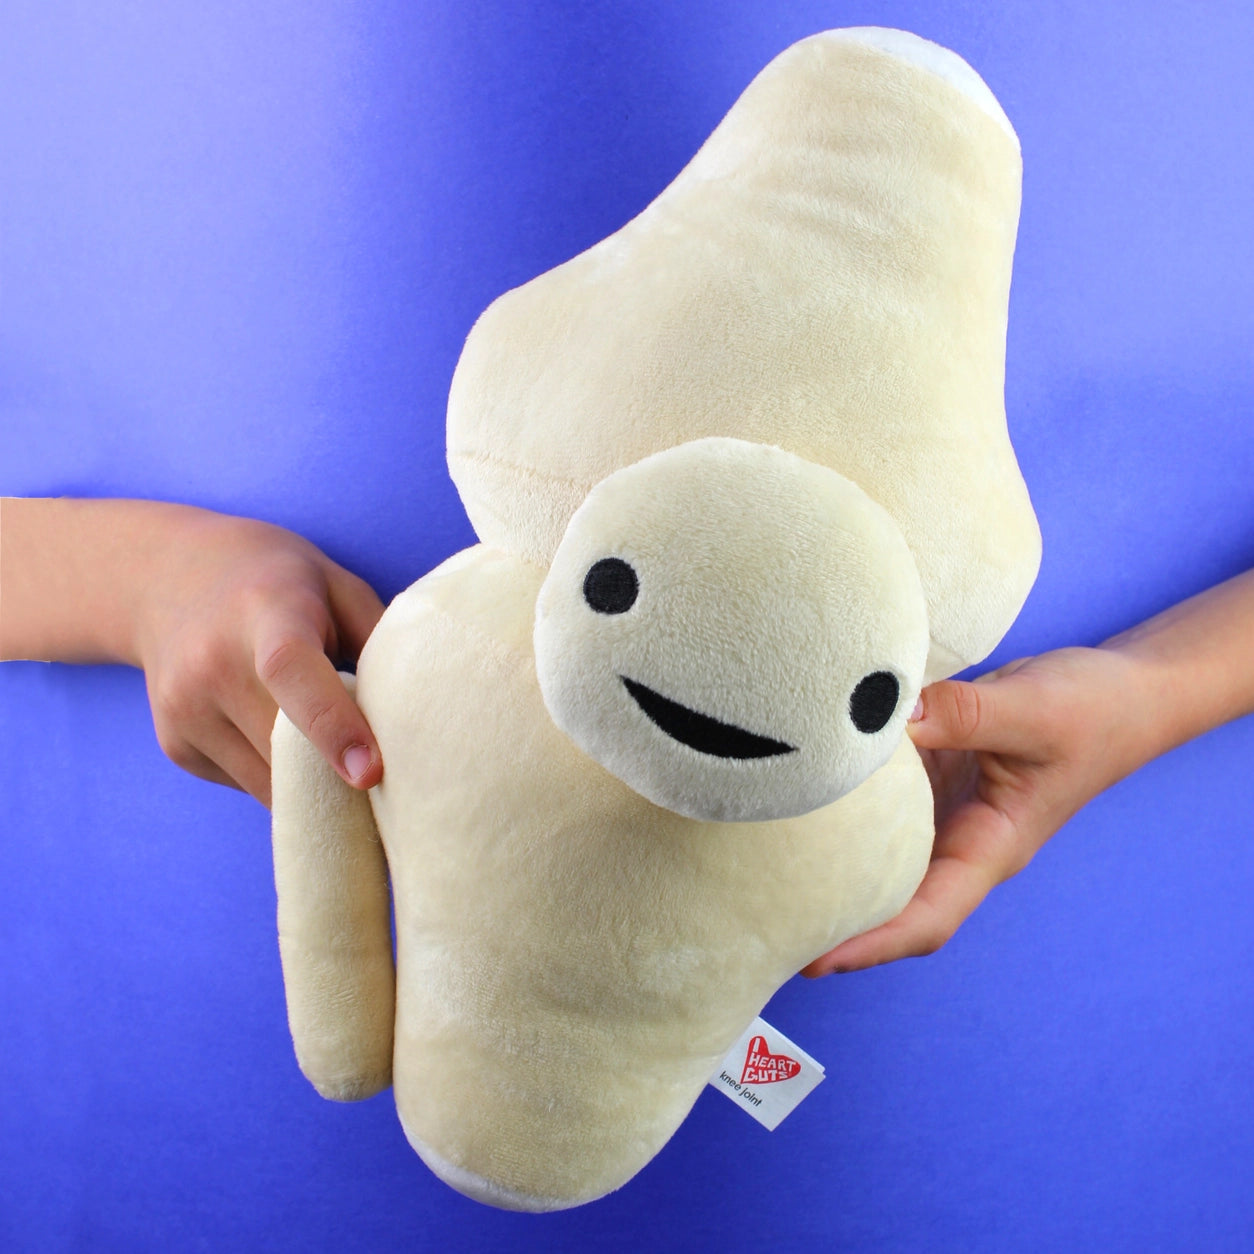 plushie knee joint - Kneed for Speed